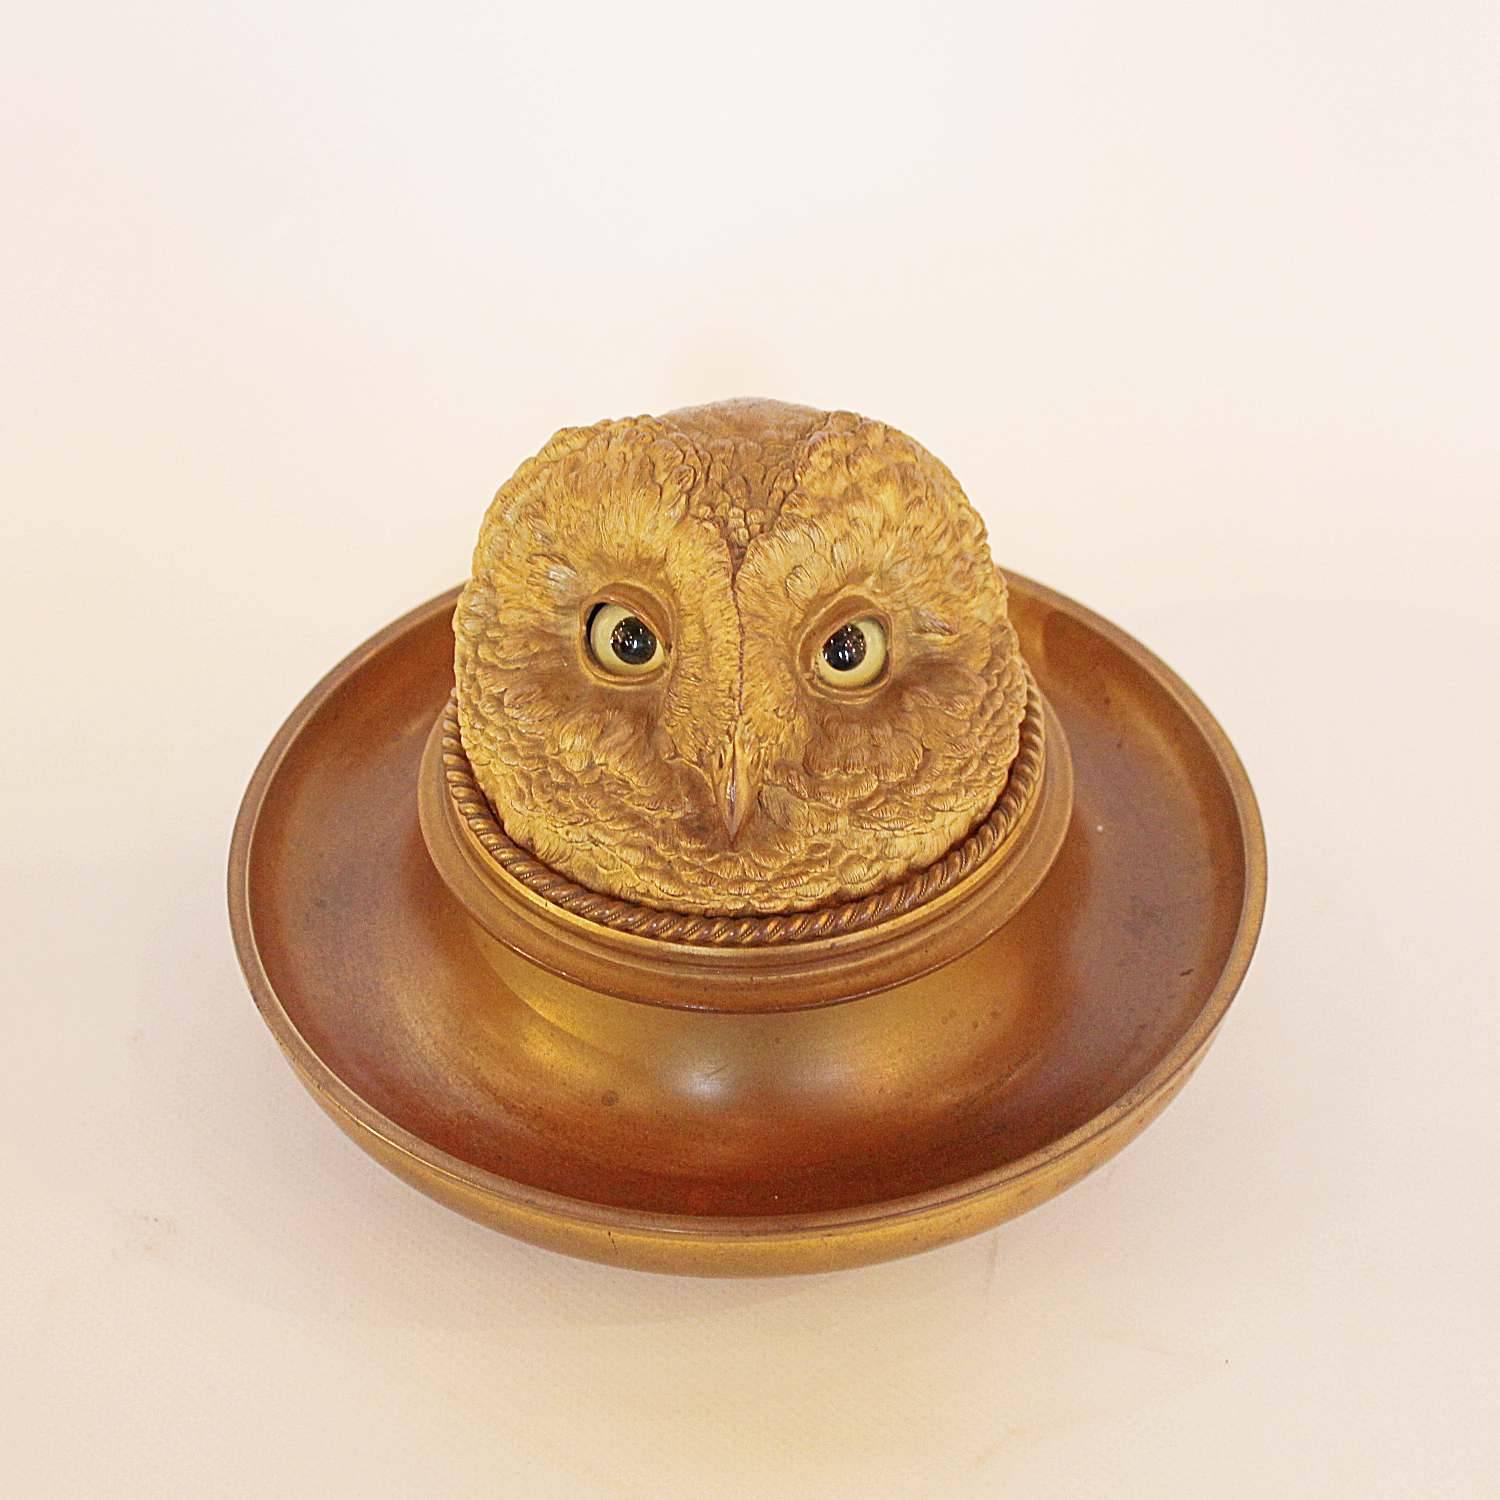 A gilt bronze inkwell in the shape of a detailed owl head, with original glass eyes, set over an integral tray. Charming characterisation and fine detail. Removable inkwell with original glass.

  